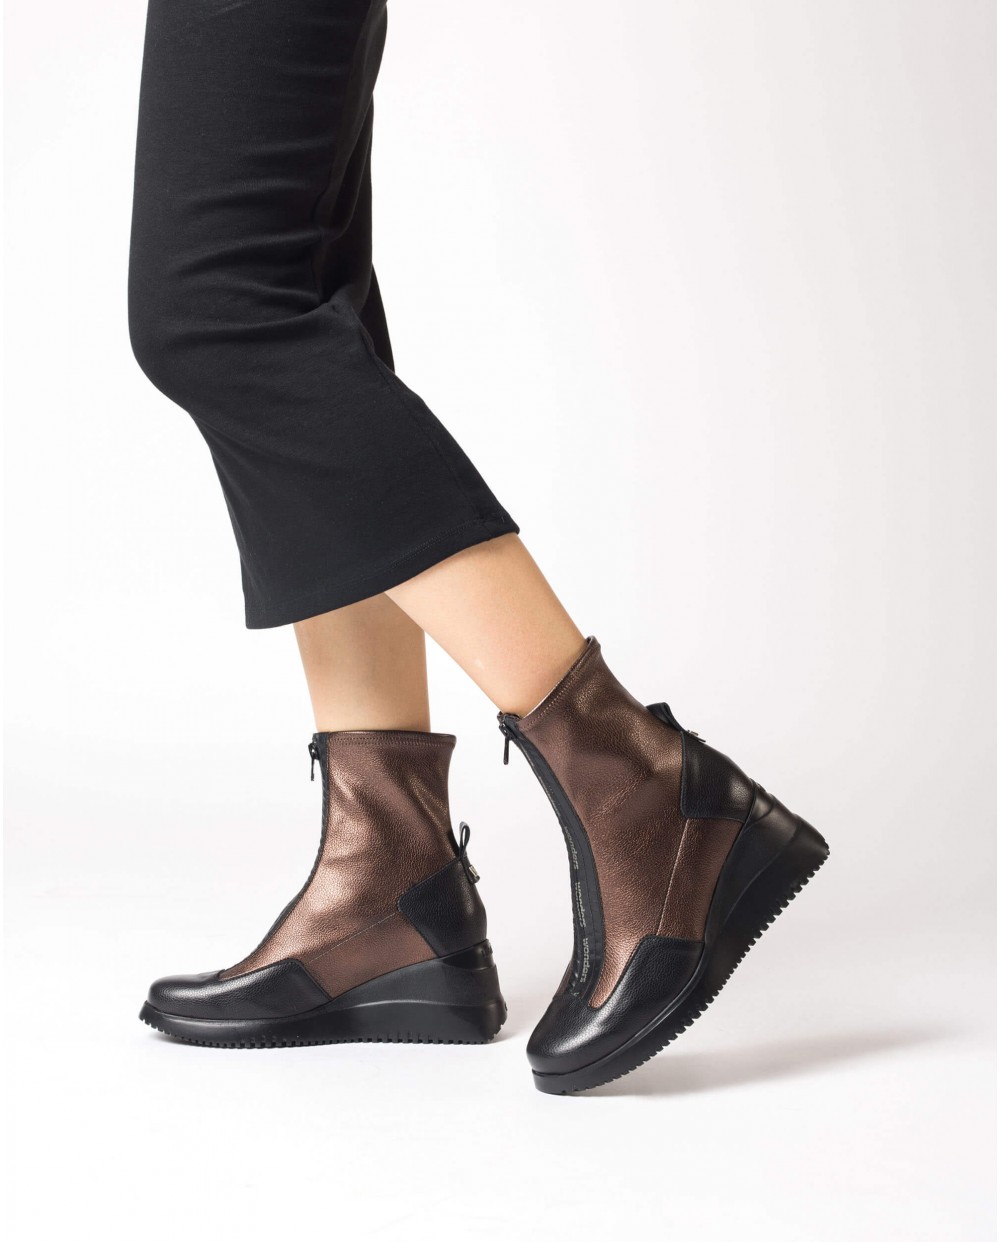 Wonders-Ankle Boots-Black INDIA ankle boot